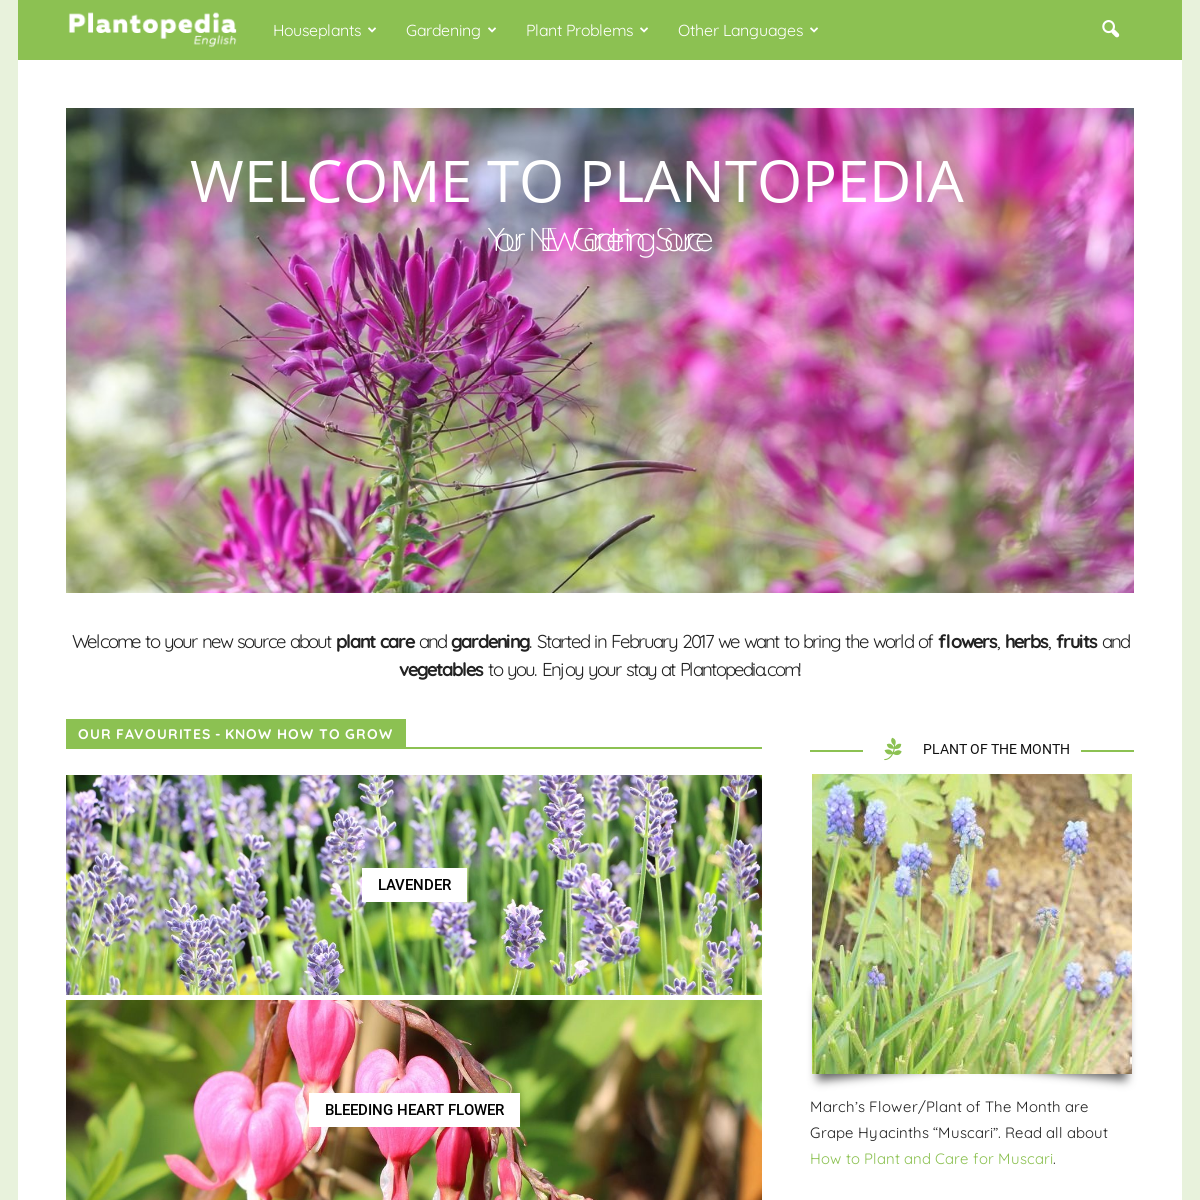 Plantopedia - Learn How to Grow and Care for Plants/Flowers